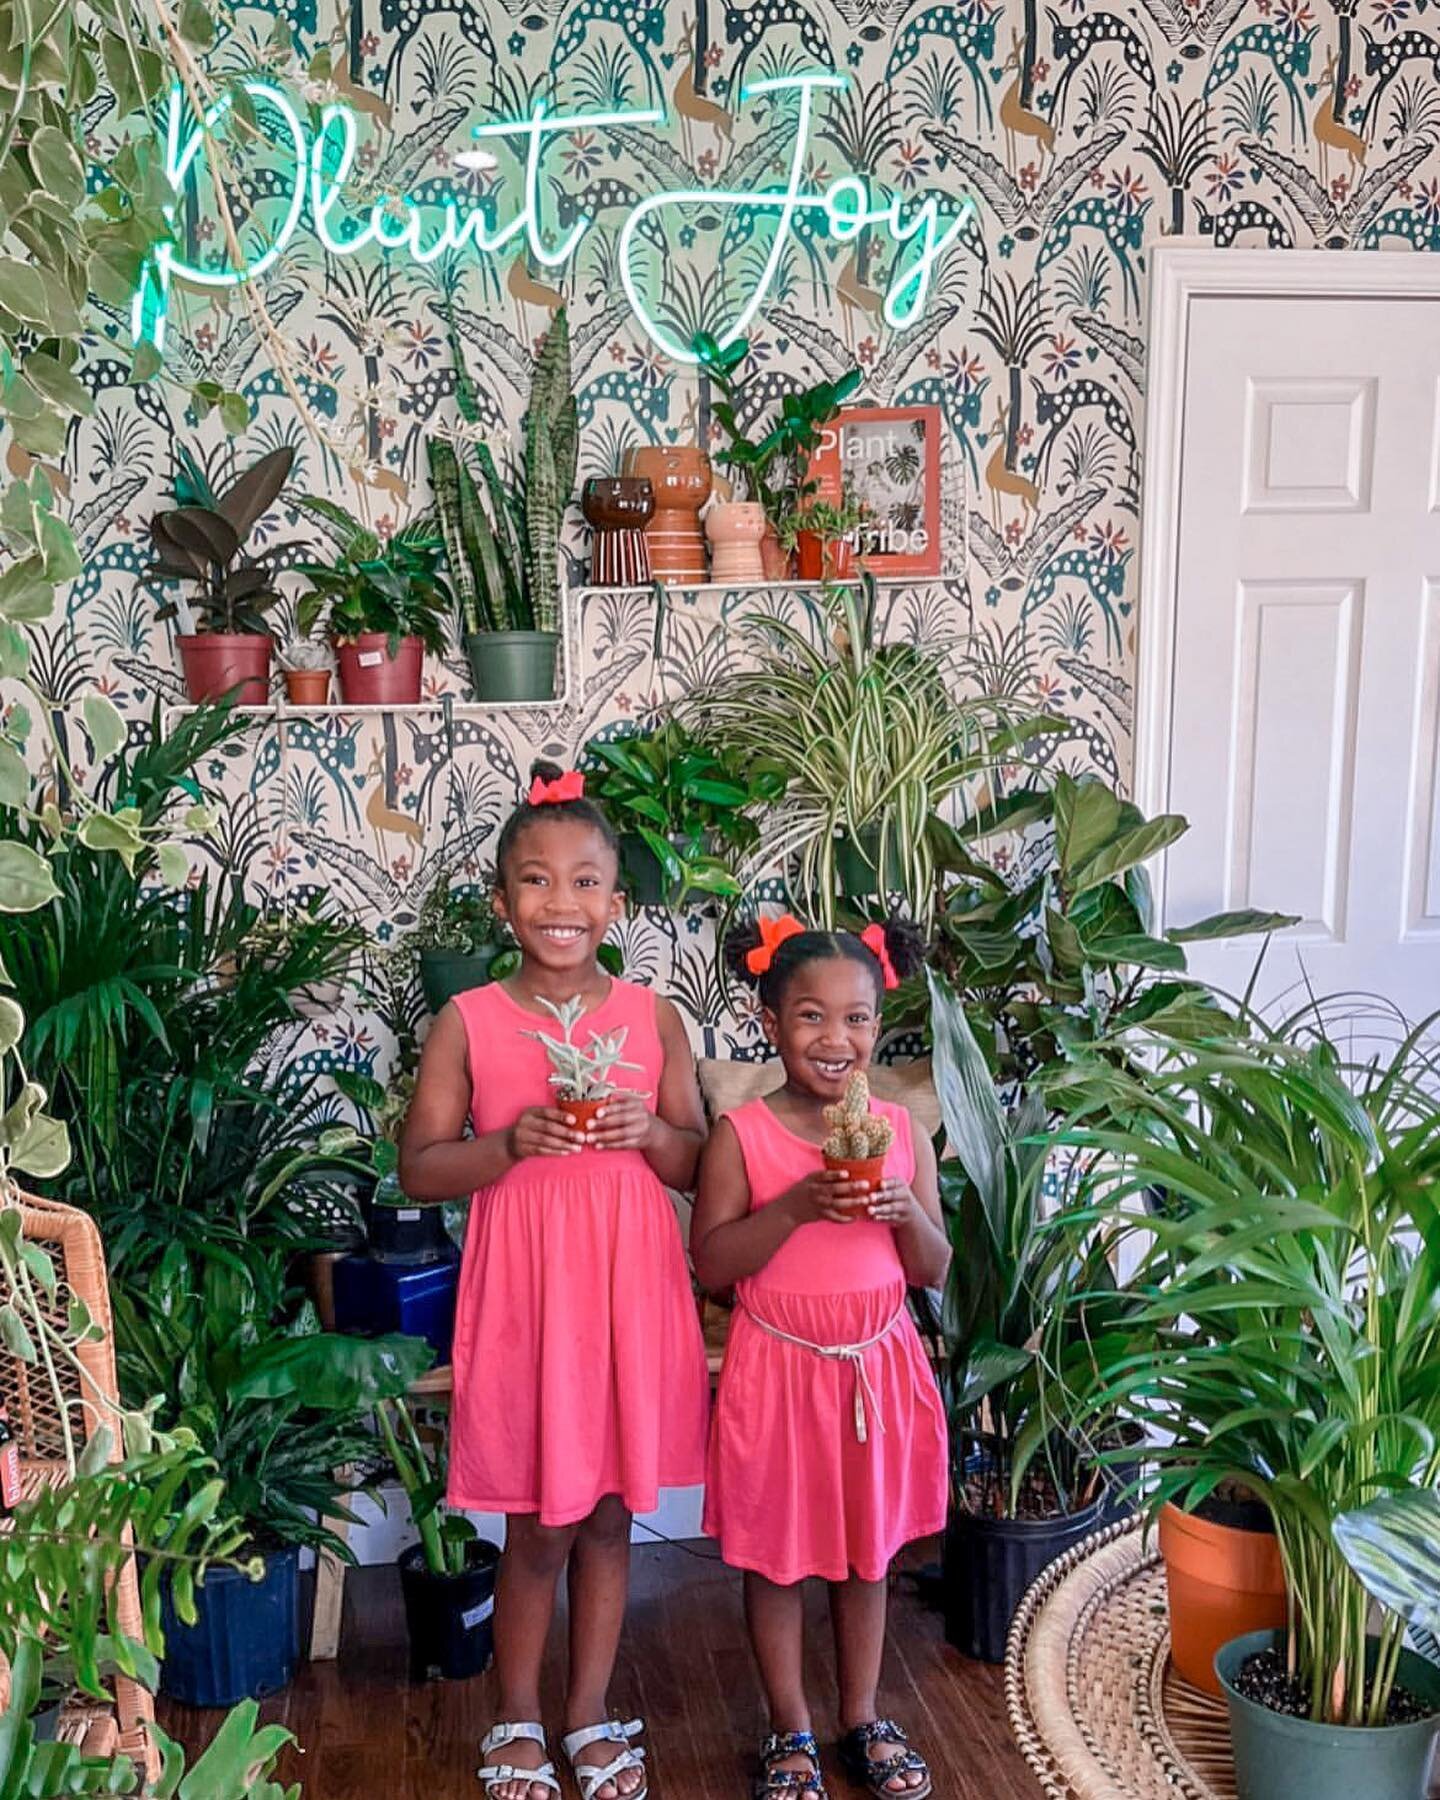 &ldquo;Be the woman you needed as a little girl.&rdquo; 

This is my why. Growing up as a little girl I didn&rsquo;t see anyone behind the counter or owned a plant shop that looked like me.

Now these beautiful little girls will. 

We are MORE than a